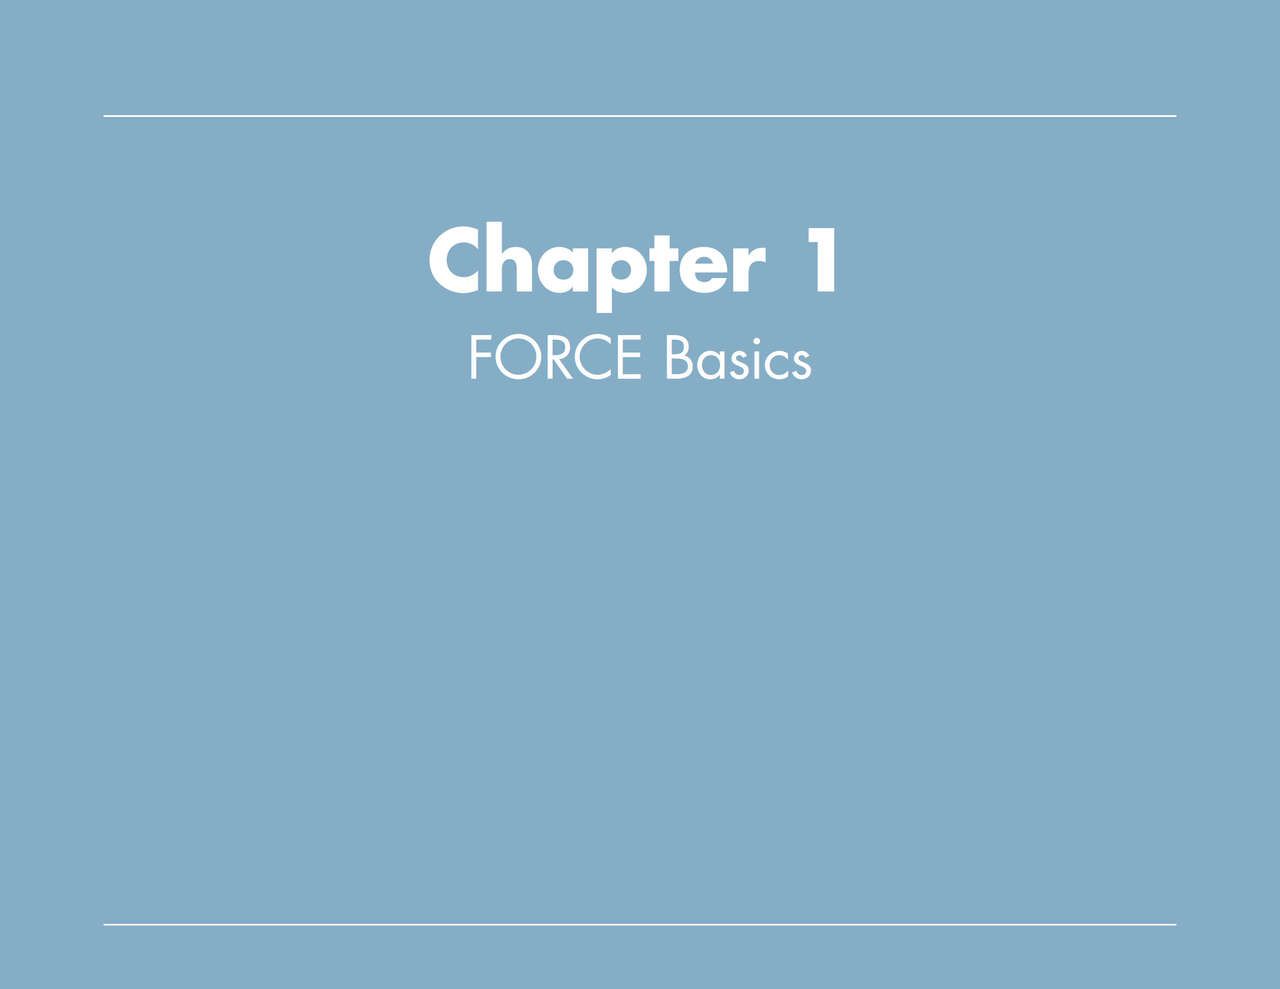 The Force companion_ quick tips and tricks-CRC Press (2019) - Michael D. Mattesi [Digital] 14